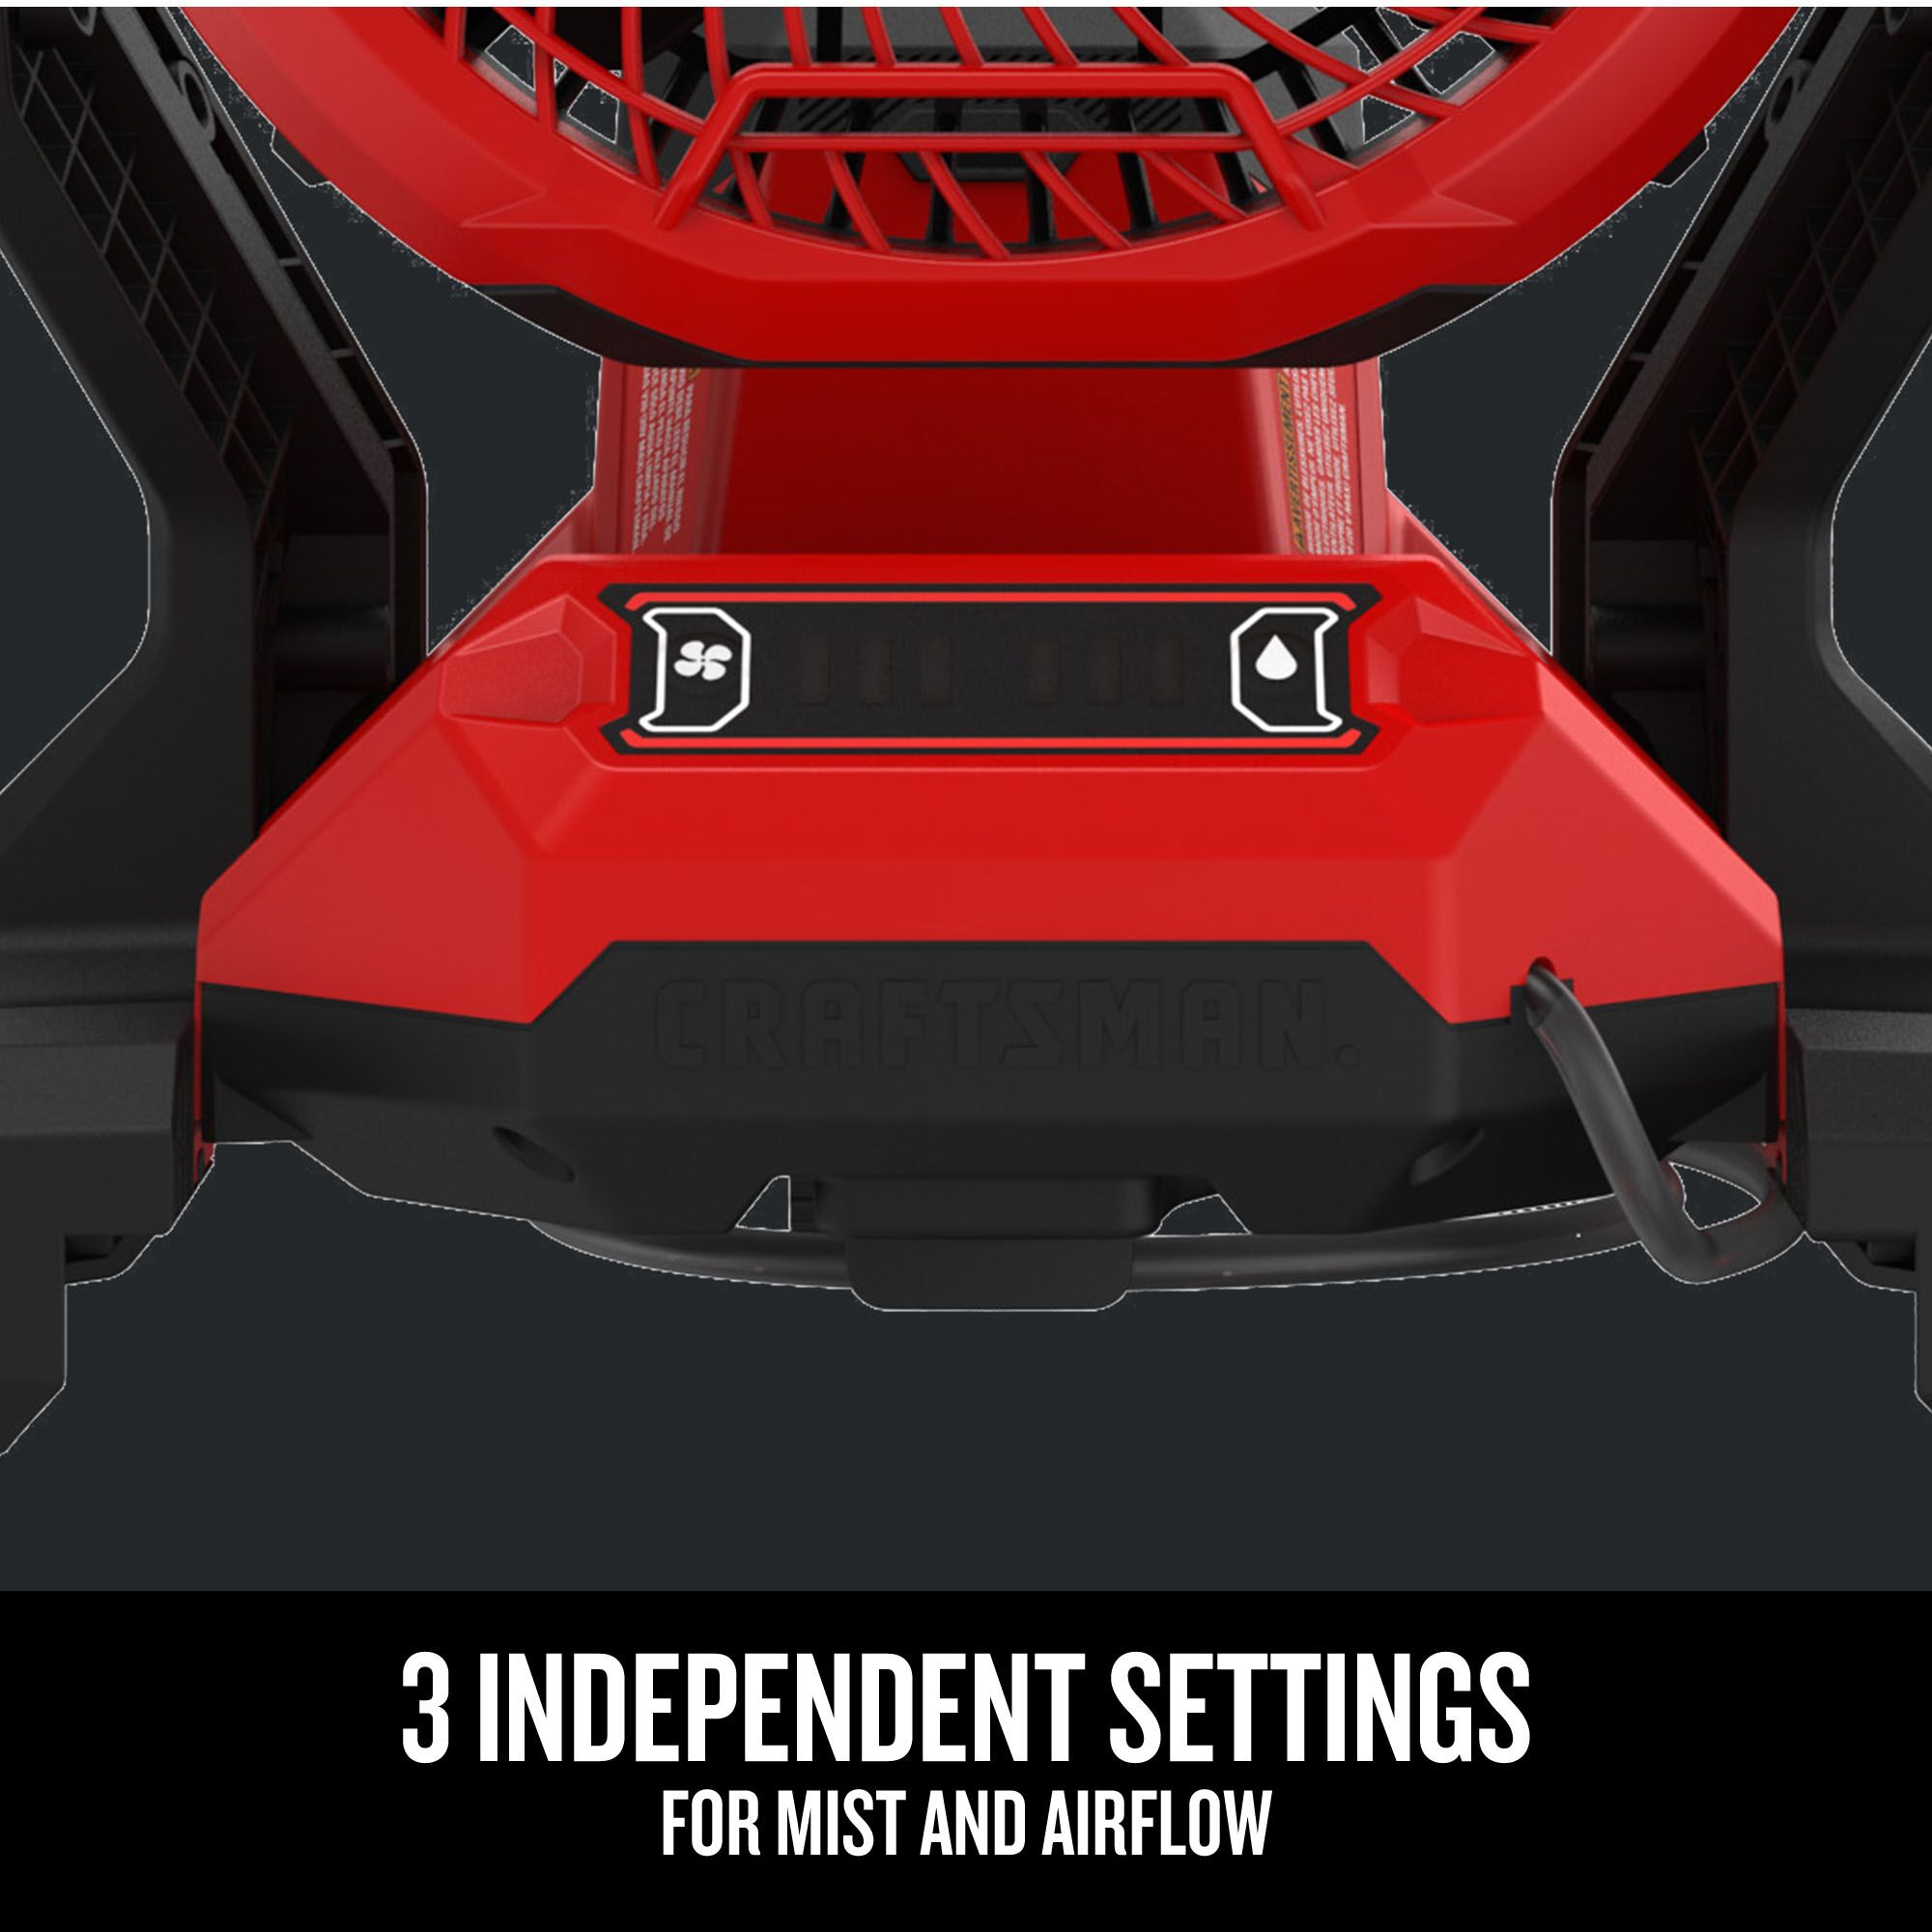 Misting Fan 3 independent settings carousel graphic